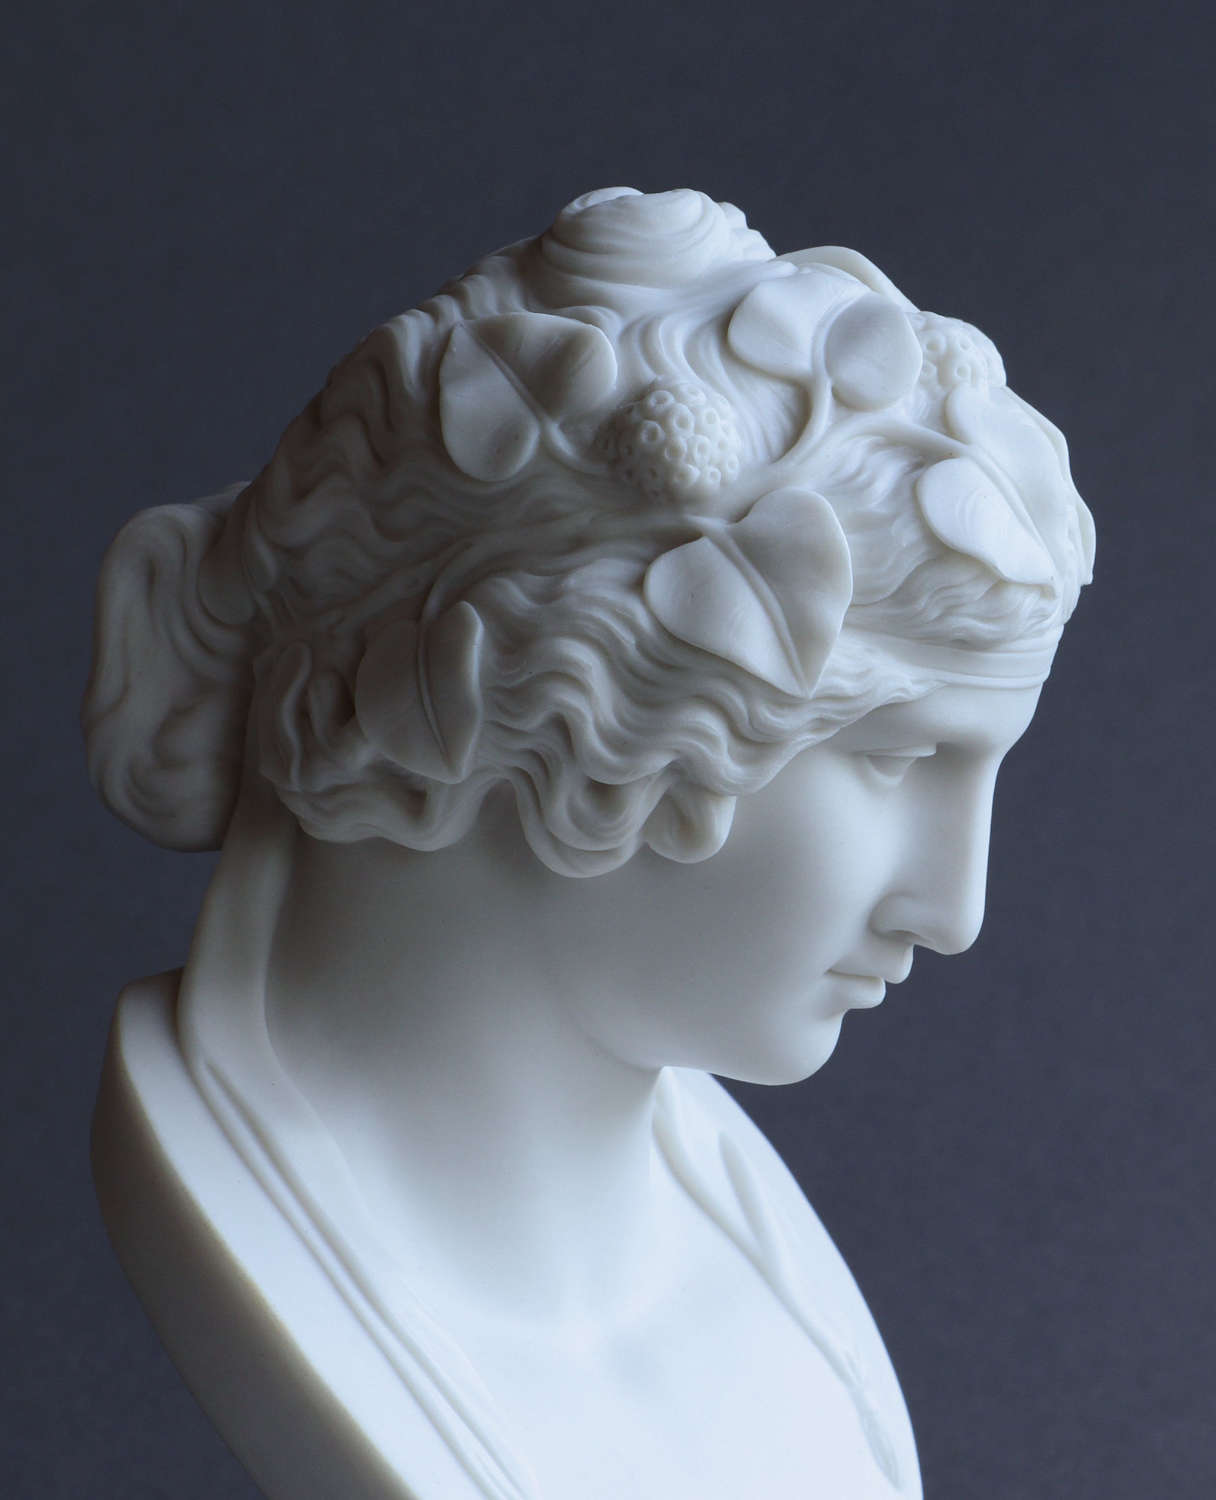 A small Parian bust of Antinous